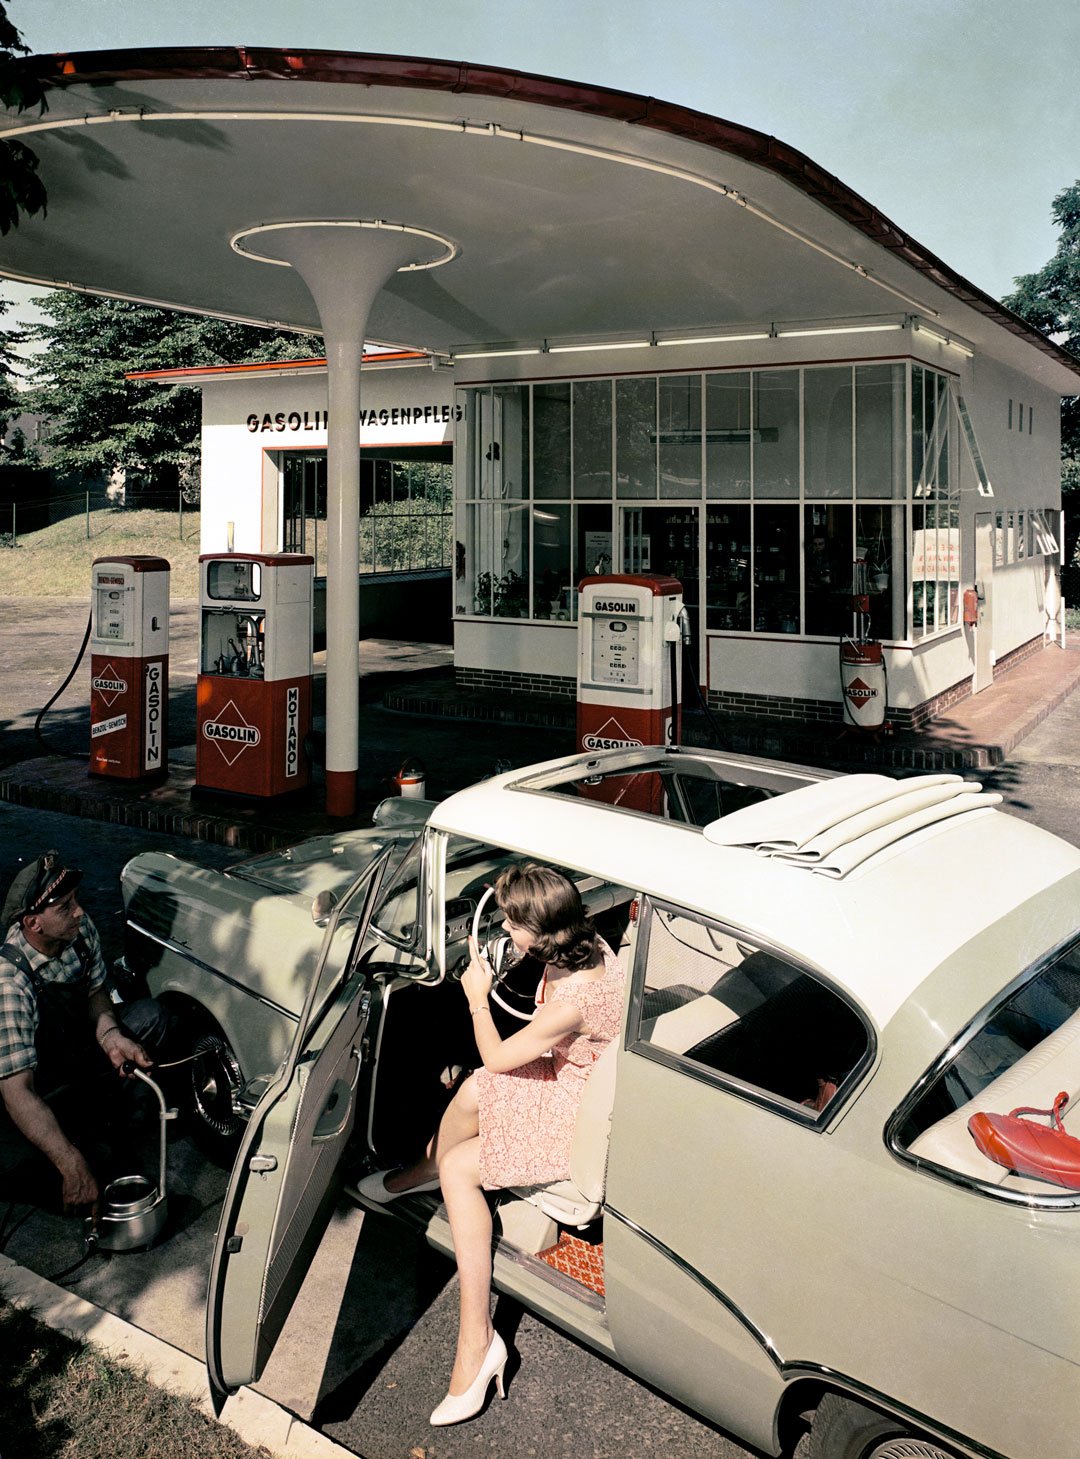 IT'S A GAS // The Allure of the Gas Station